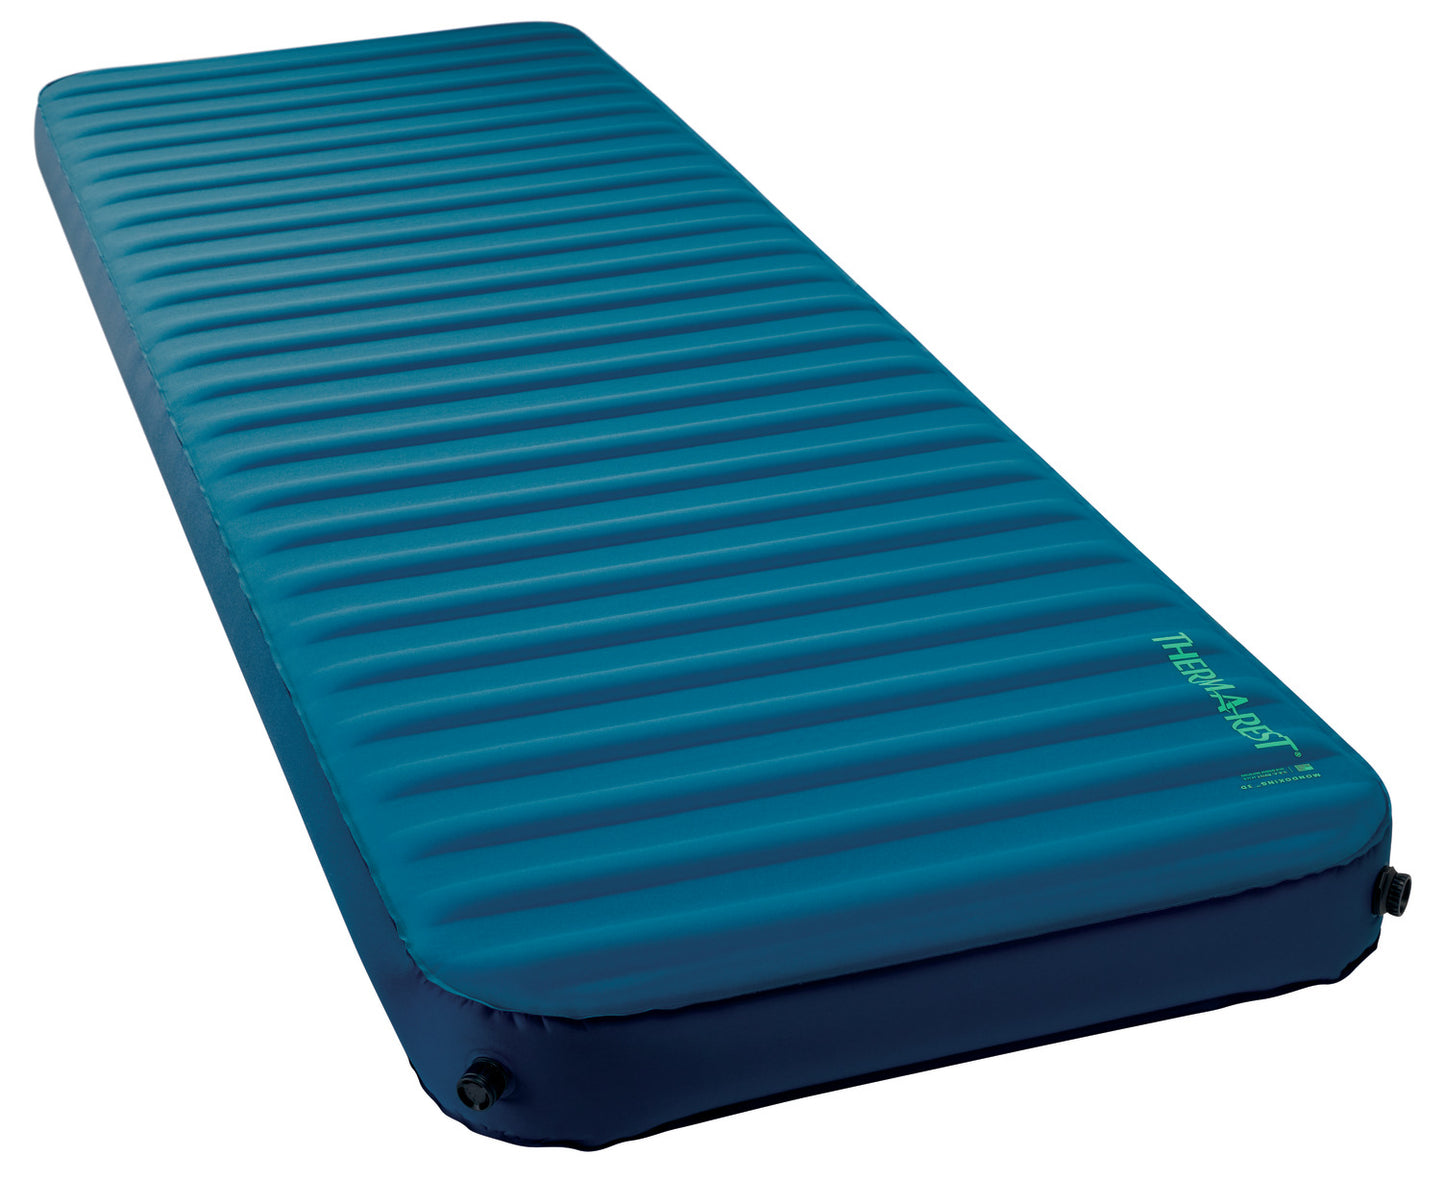 Therm-a-Rest MondoKing™ 3D Sleeping Pad - Large